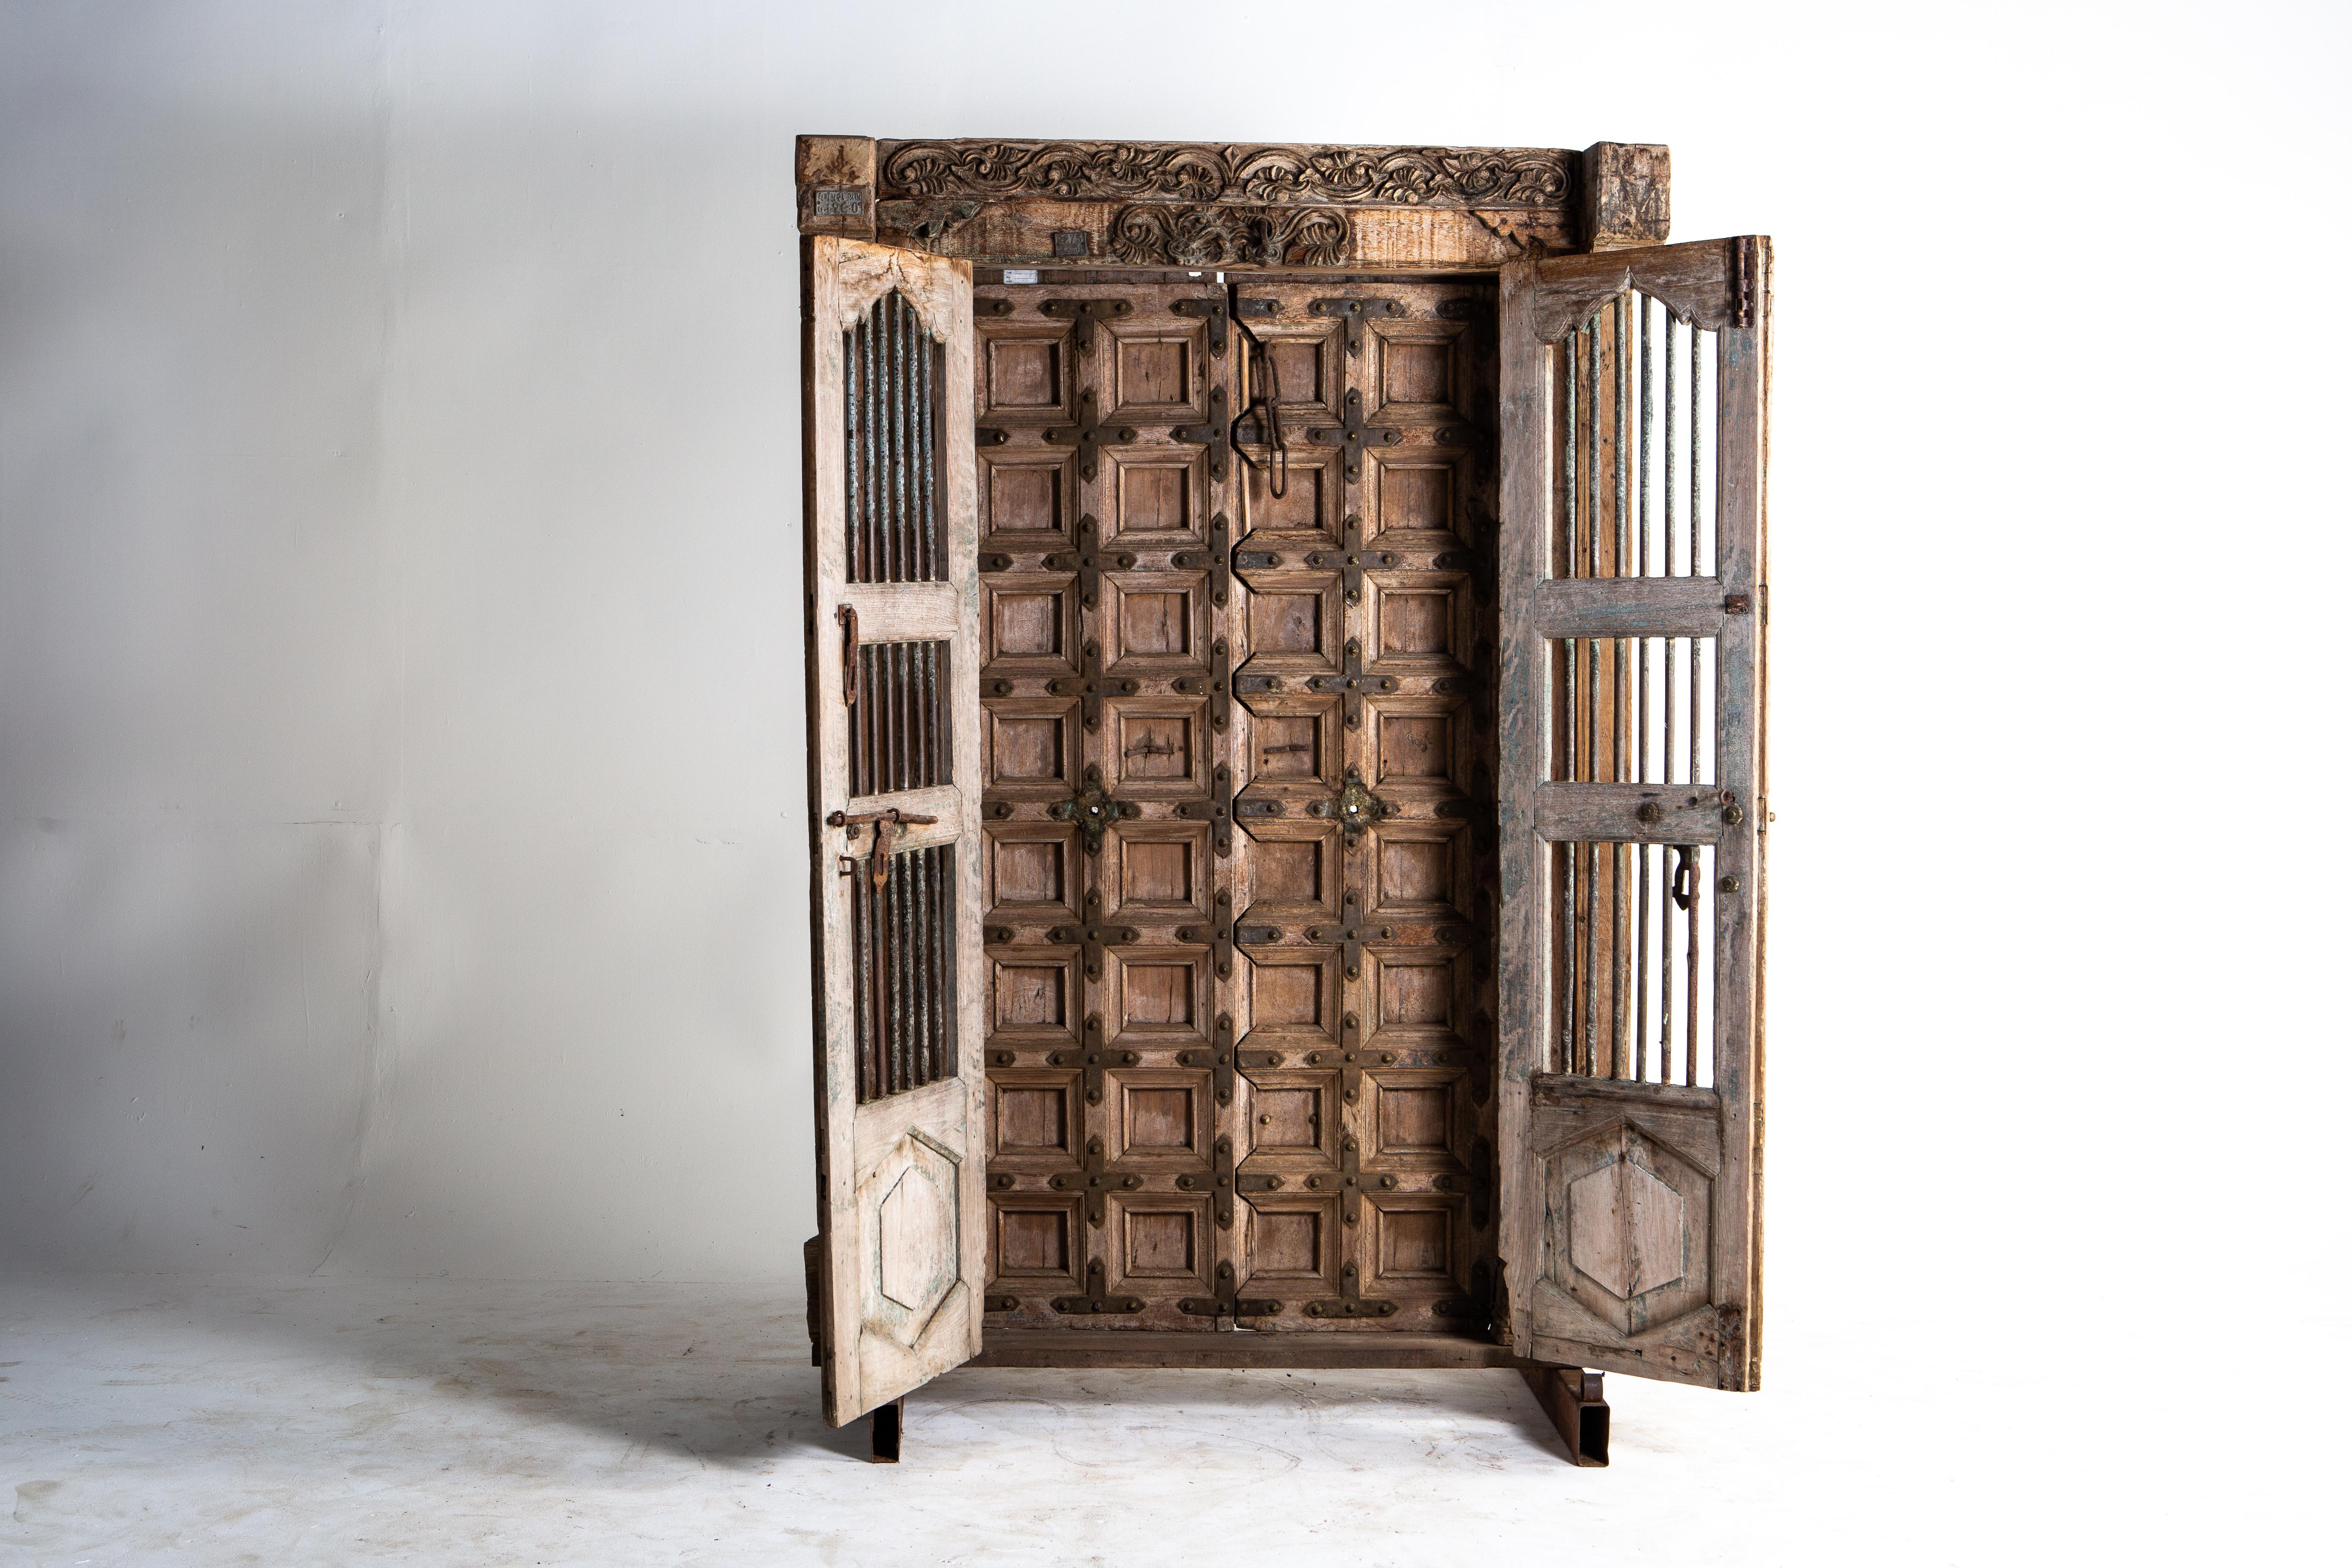 This complete entryway is handsomely relief carved; the frame features intricate floral motifs and geometric patterns throughout. The panelled doors, with metal studs and hardware, open inwardly and can be secured with a chain and pin lock. The